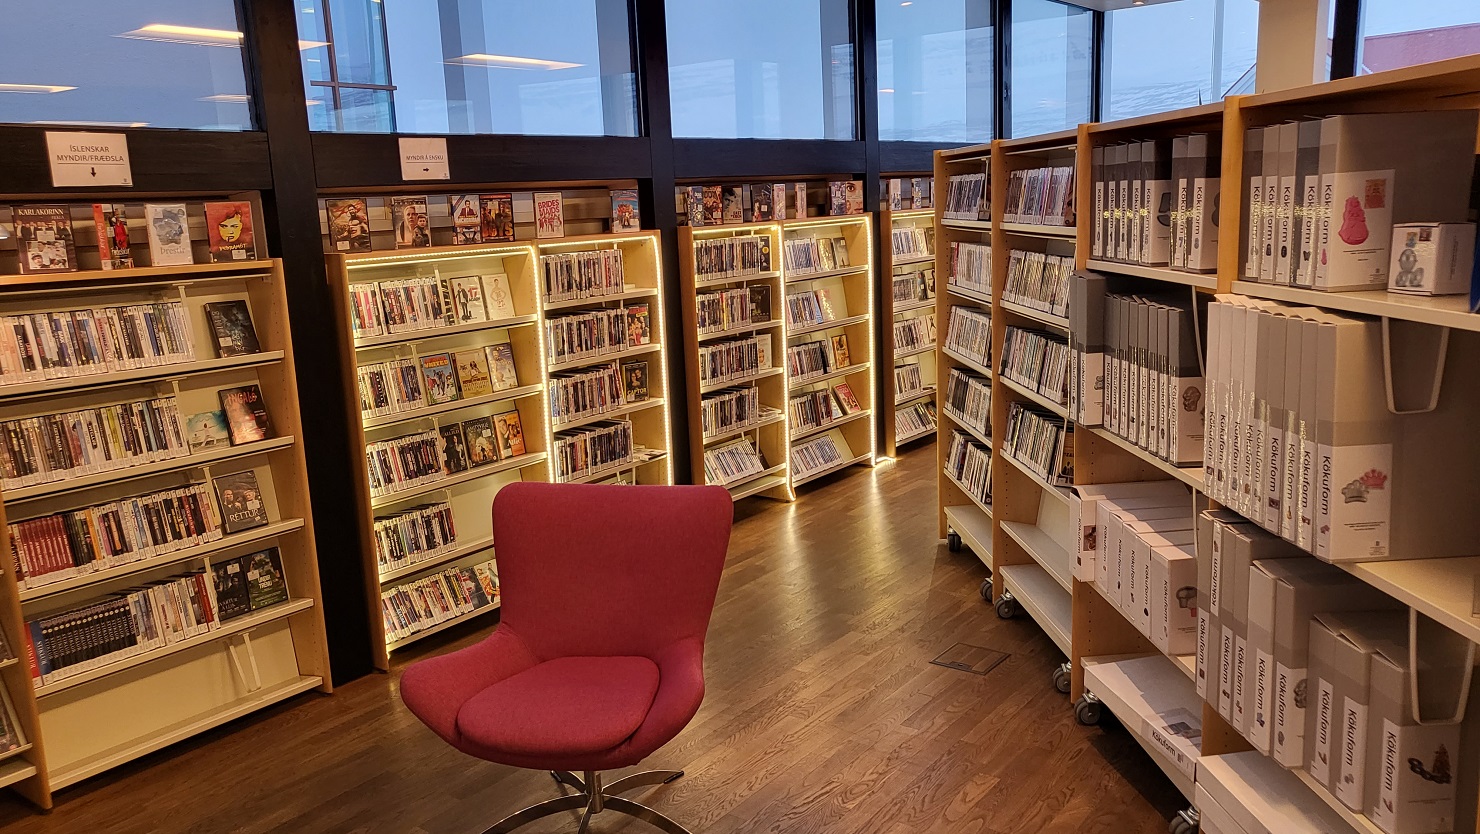 DVDs in shelves and a chair in front 